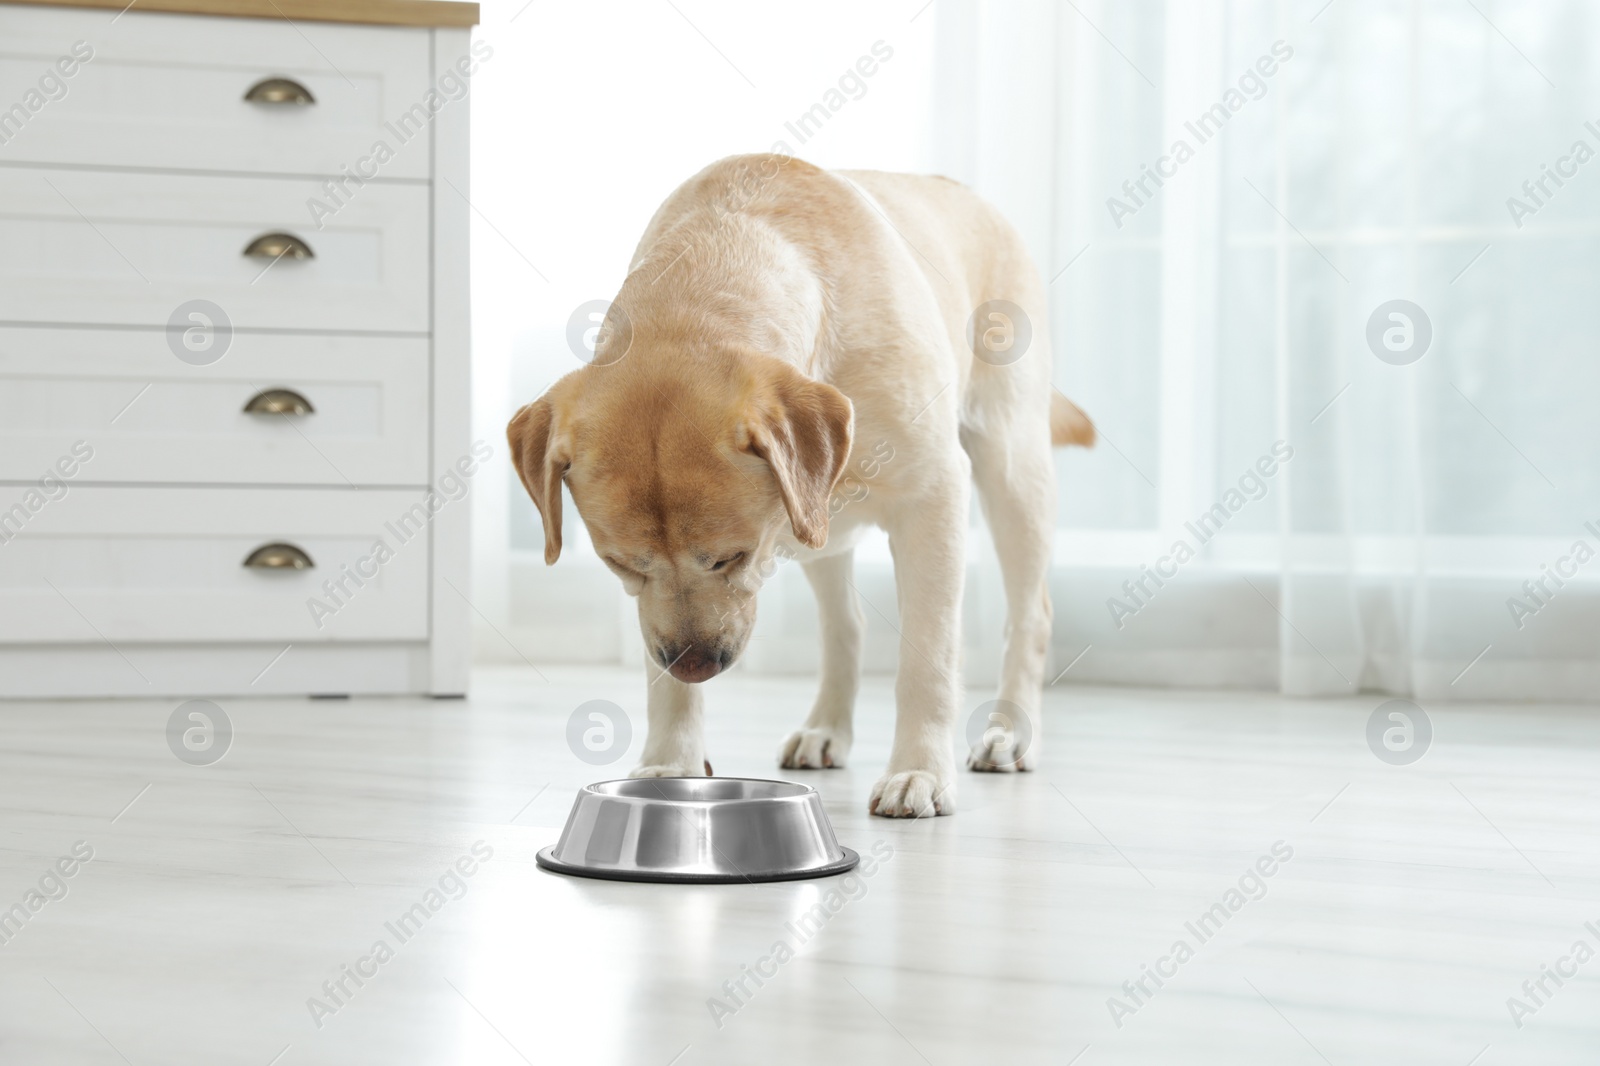 Photo of Yellow labrador retriever eating from bowl on floor indoors